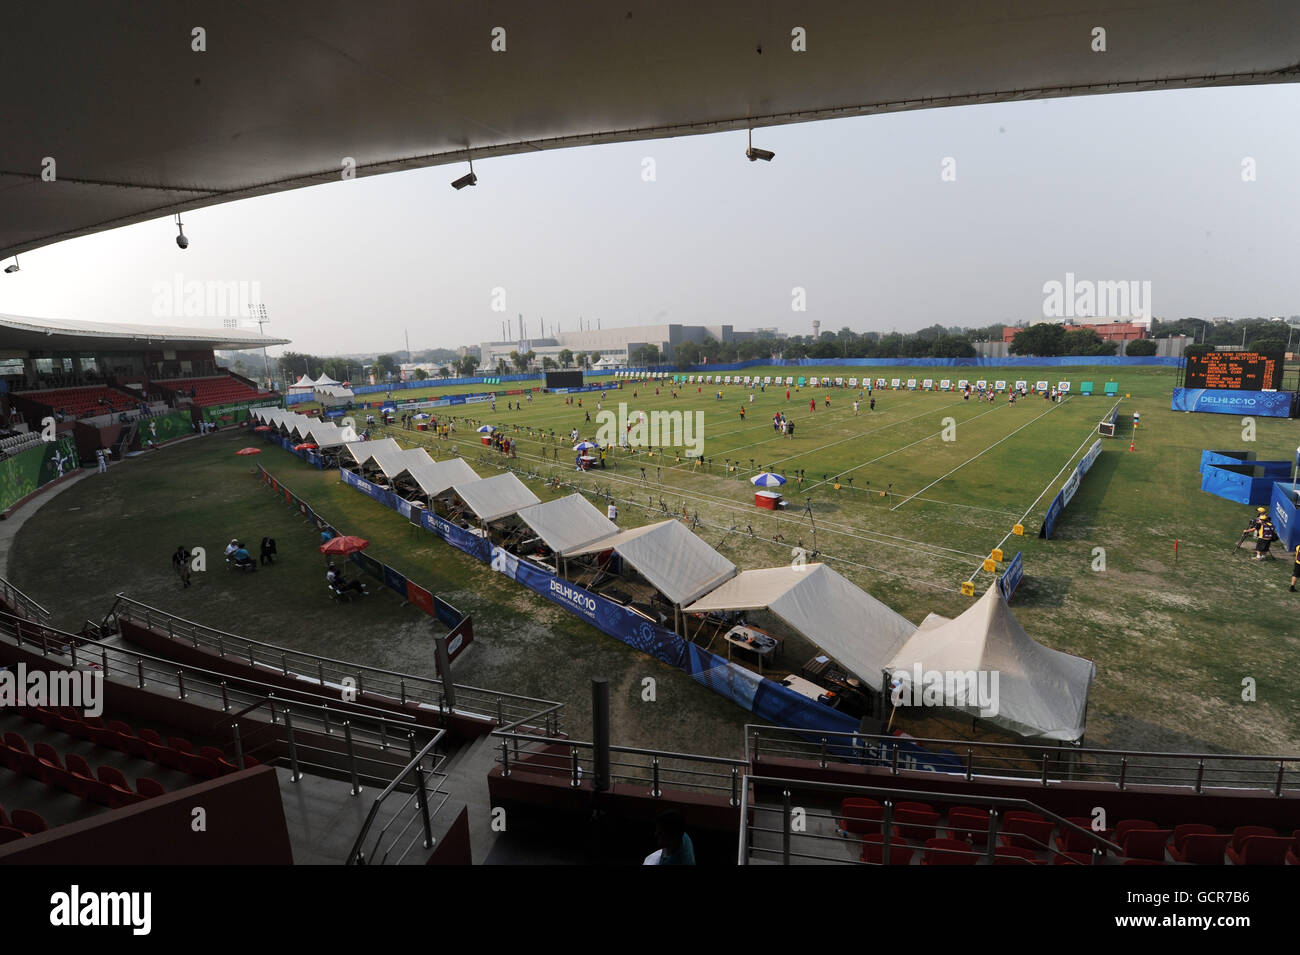 A general view of the Yamuna Sports Comple, venue for the Archery, during Day One of the 2010 Commonwealth Games in New Delhi, India. Stock Photo